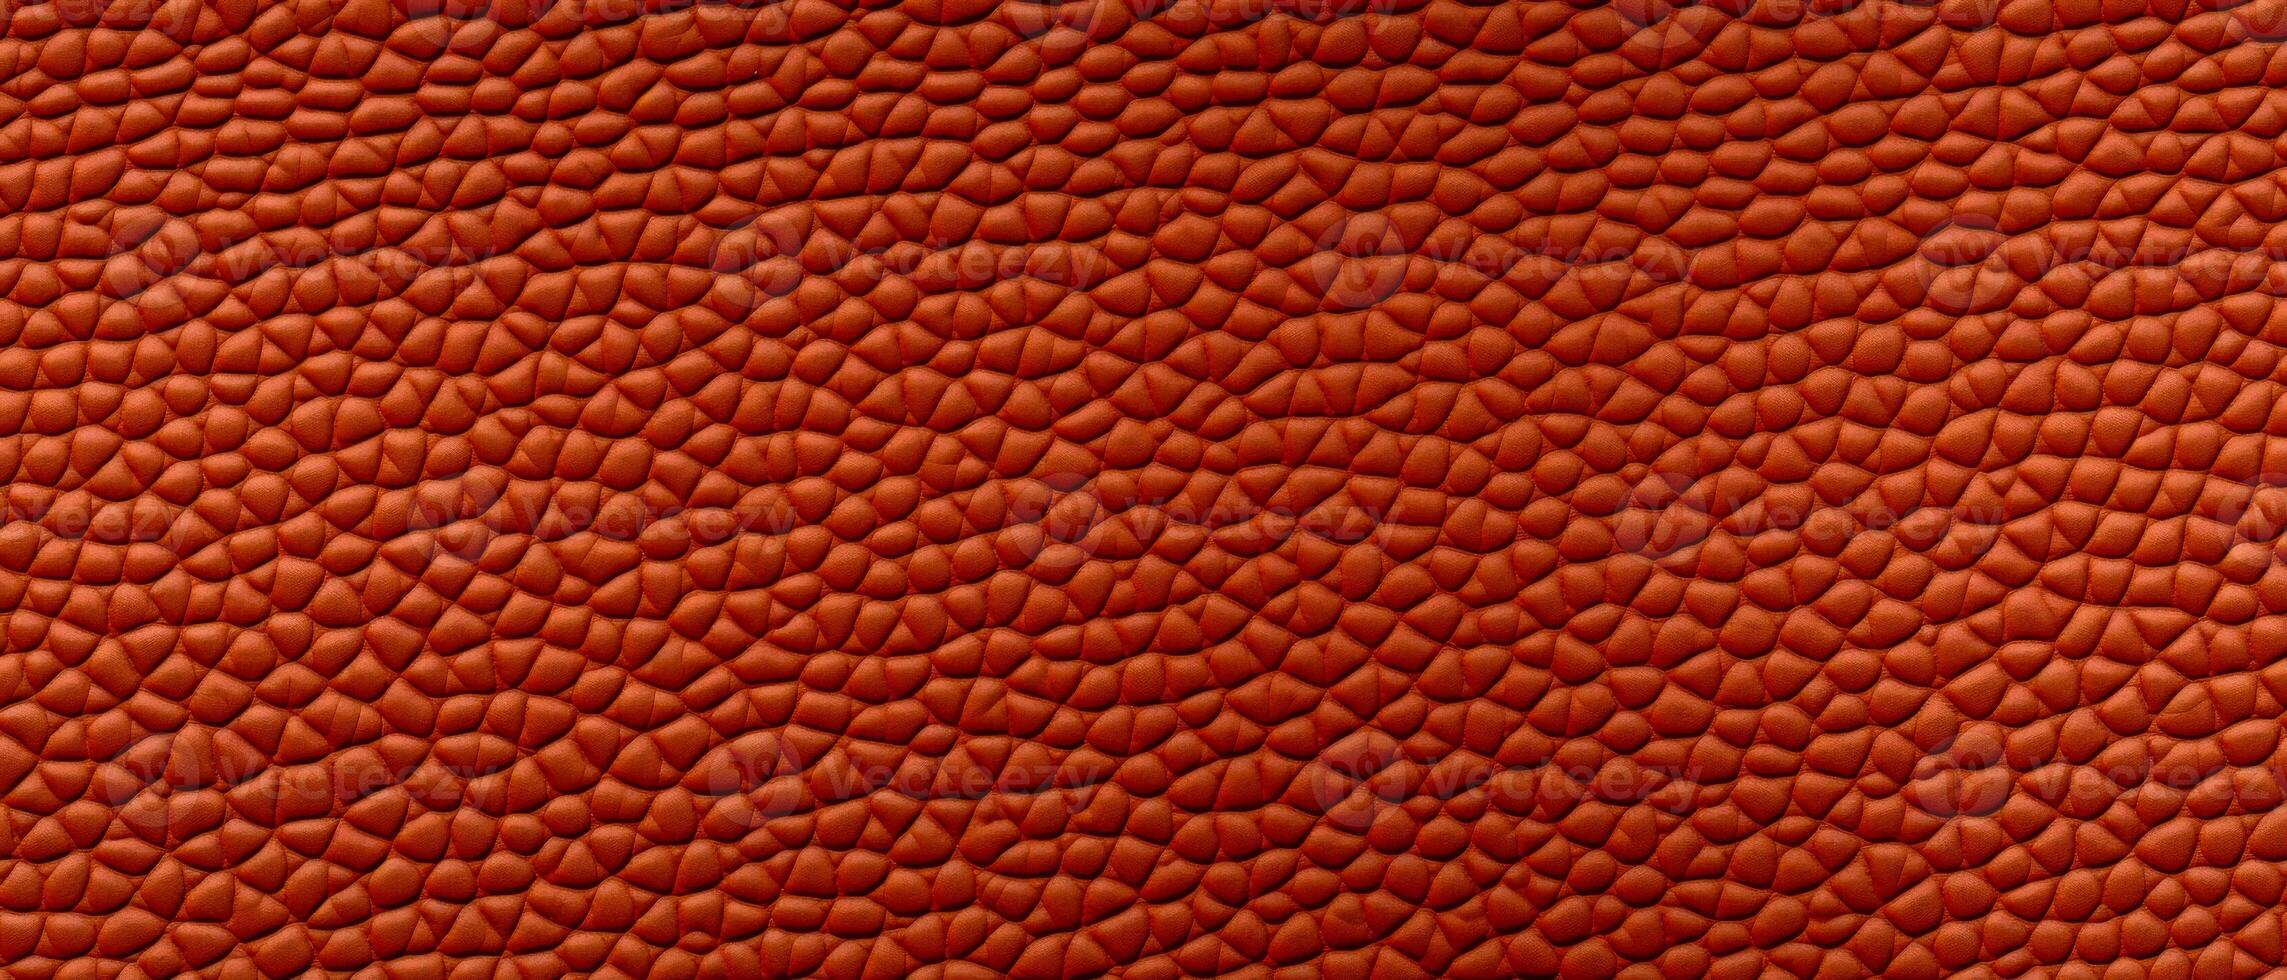 AI generated Textured Red Leather Close-Up Background. Close-up of red leather texture with a pattern of interwoven lines, suitable for backgrounds or detailing photo